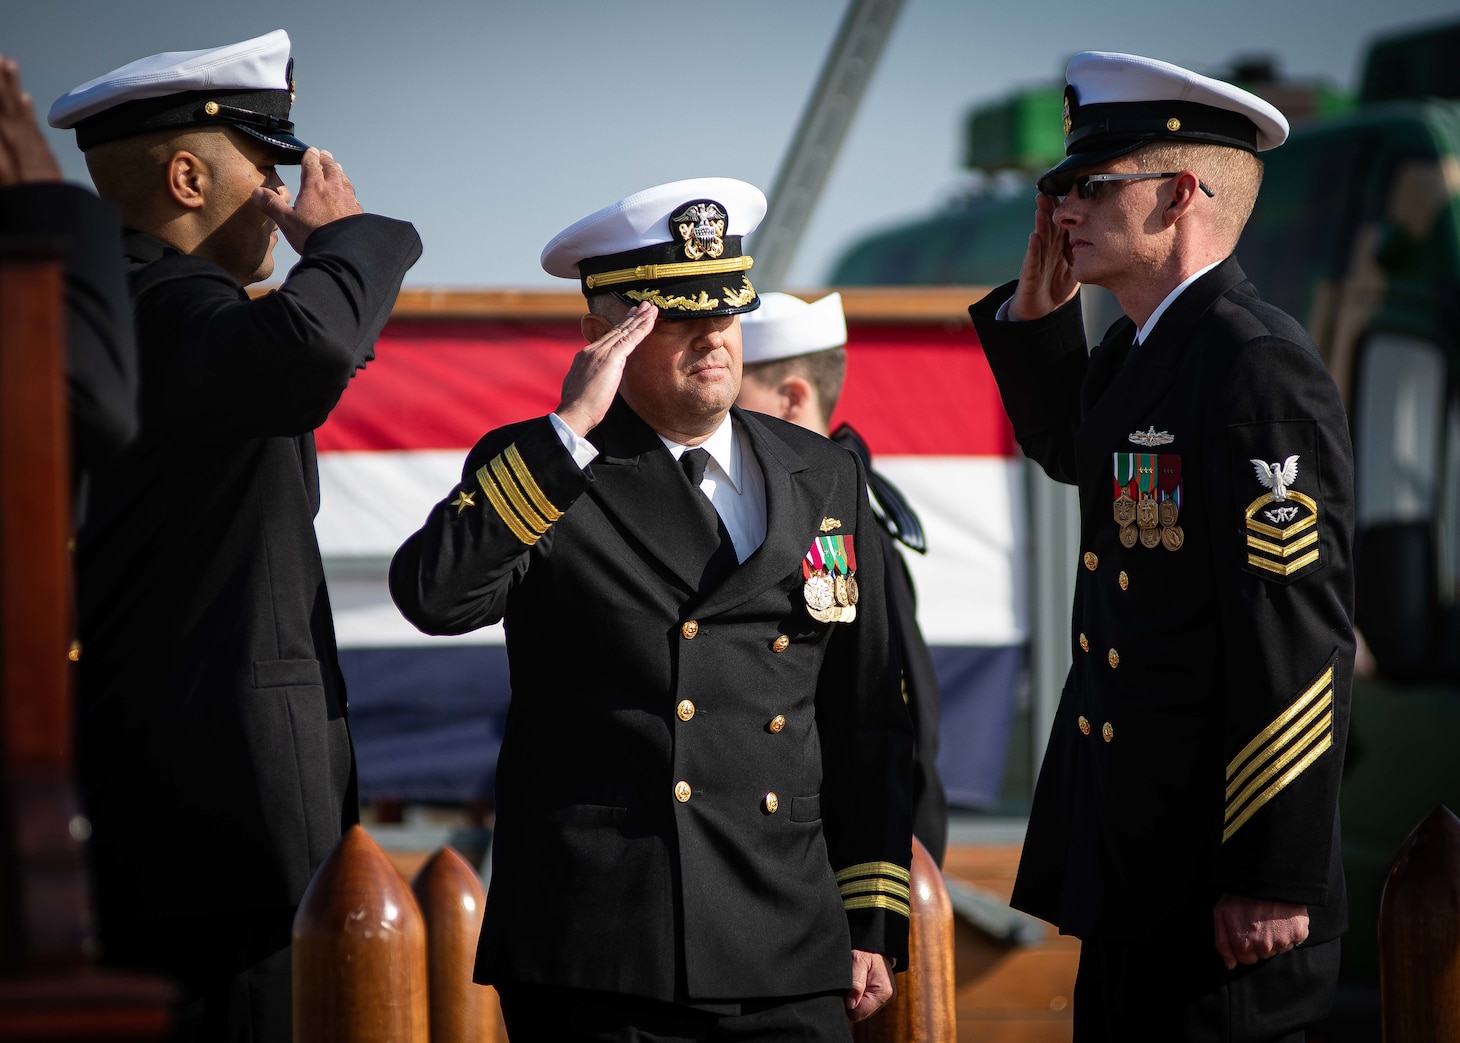 Cmdr. Jonathan P. Schermerhorn, Commander, U.S. Aegis Ashore Missile Defense System Romania (USAAMDSRO), renders a hand salute to sideboys following a change of command ceremony on Naval Support Facility (NSF) Deveselu, Romania, Oct. 14, 2022.